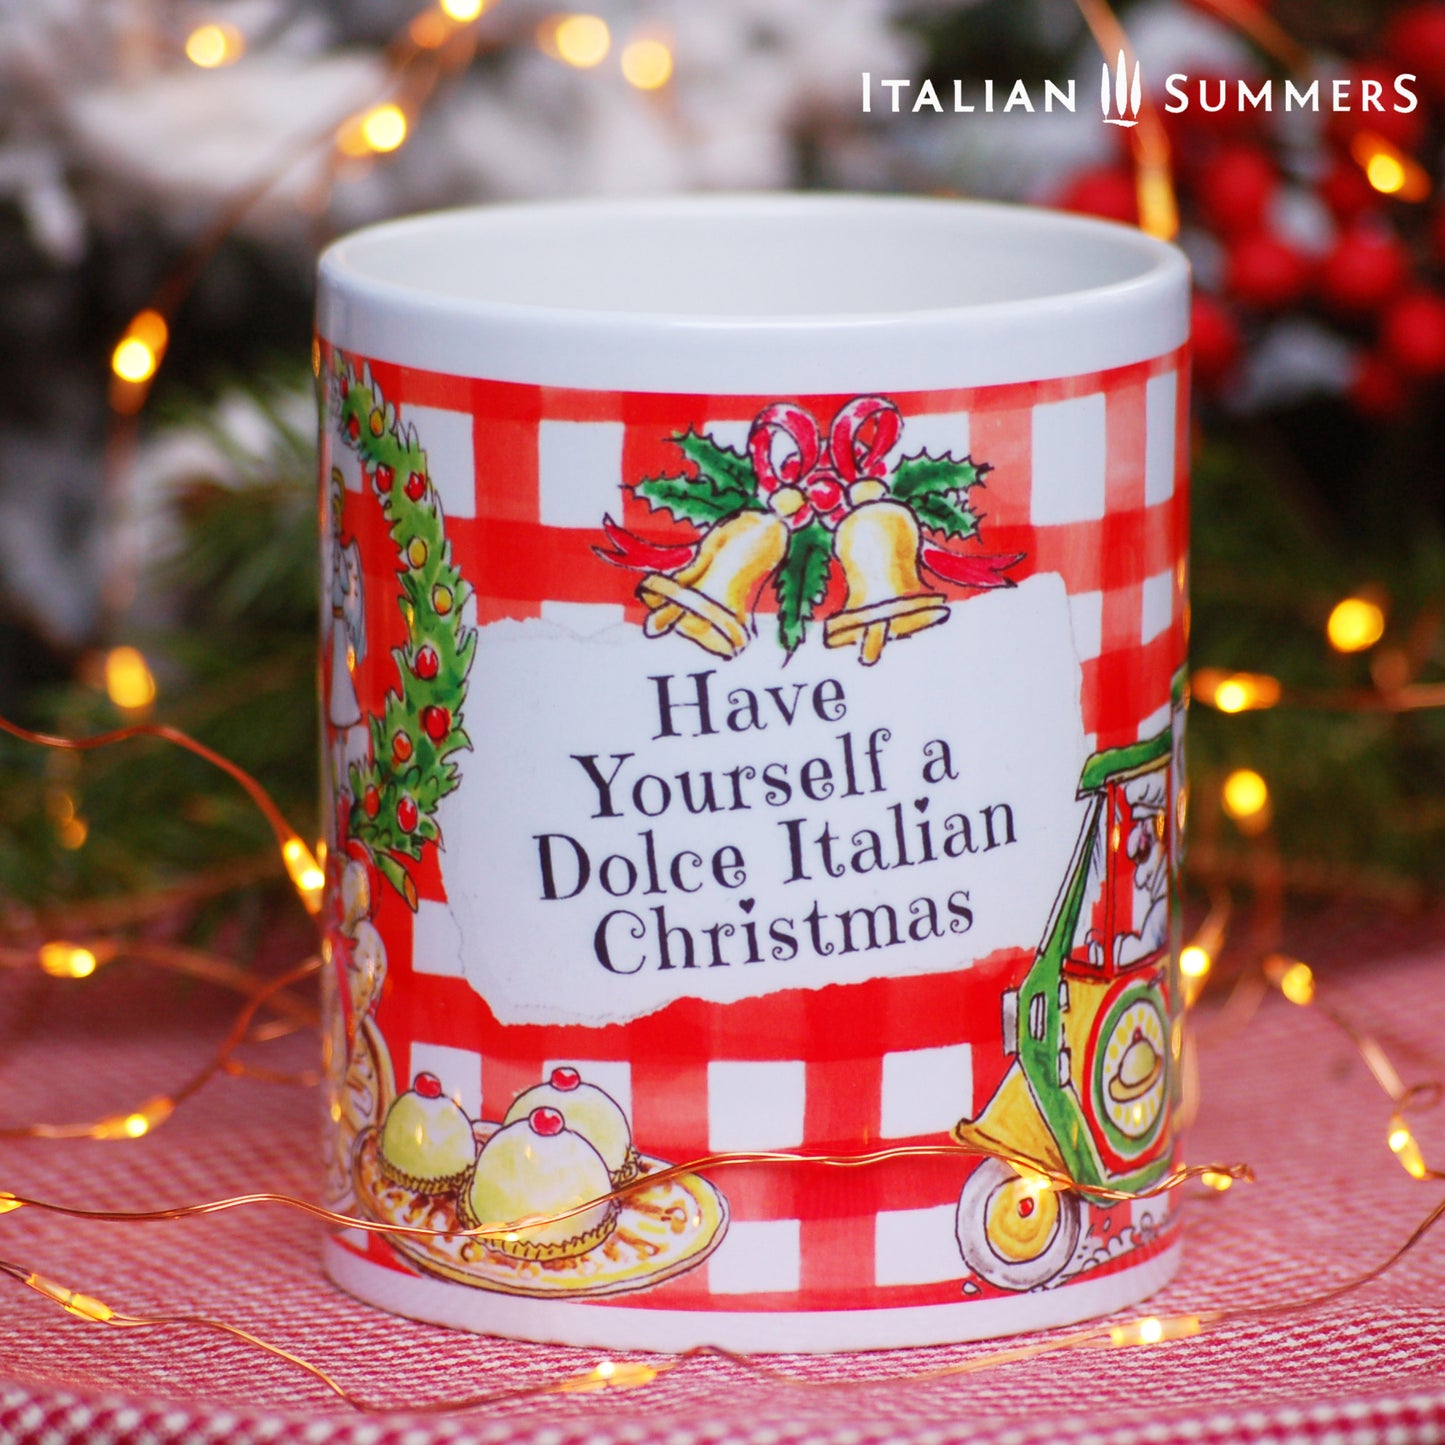 Italy Chirstmas mug Pane e Dolci with a sketch of the local Italian baker, driving his funny car with the text PANE & DOLCE, and on the top he has the biggest panettone. Ther are italian dolce on the mug and the text "have yourself a Dolce Italian Christmas" made by Italian Summers